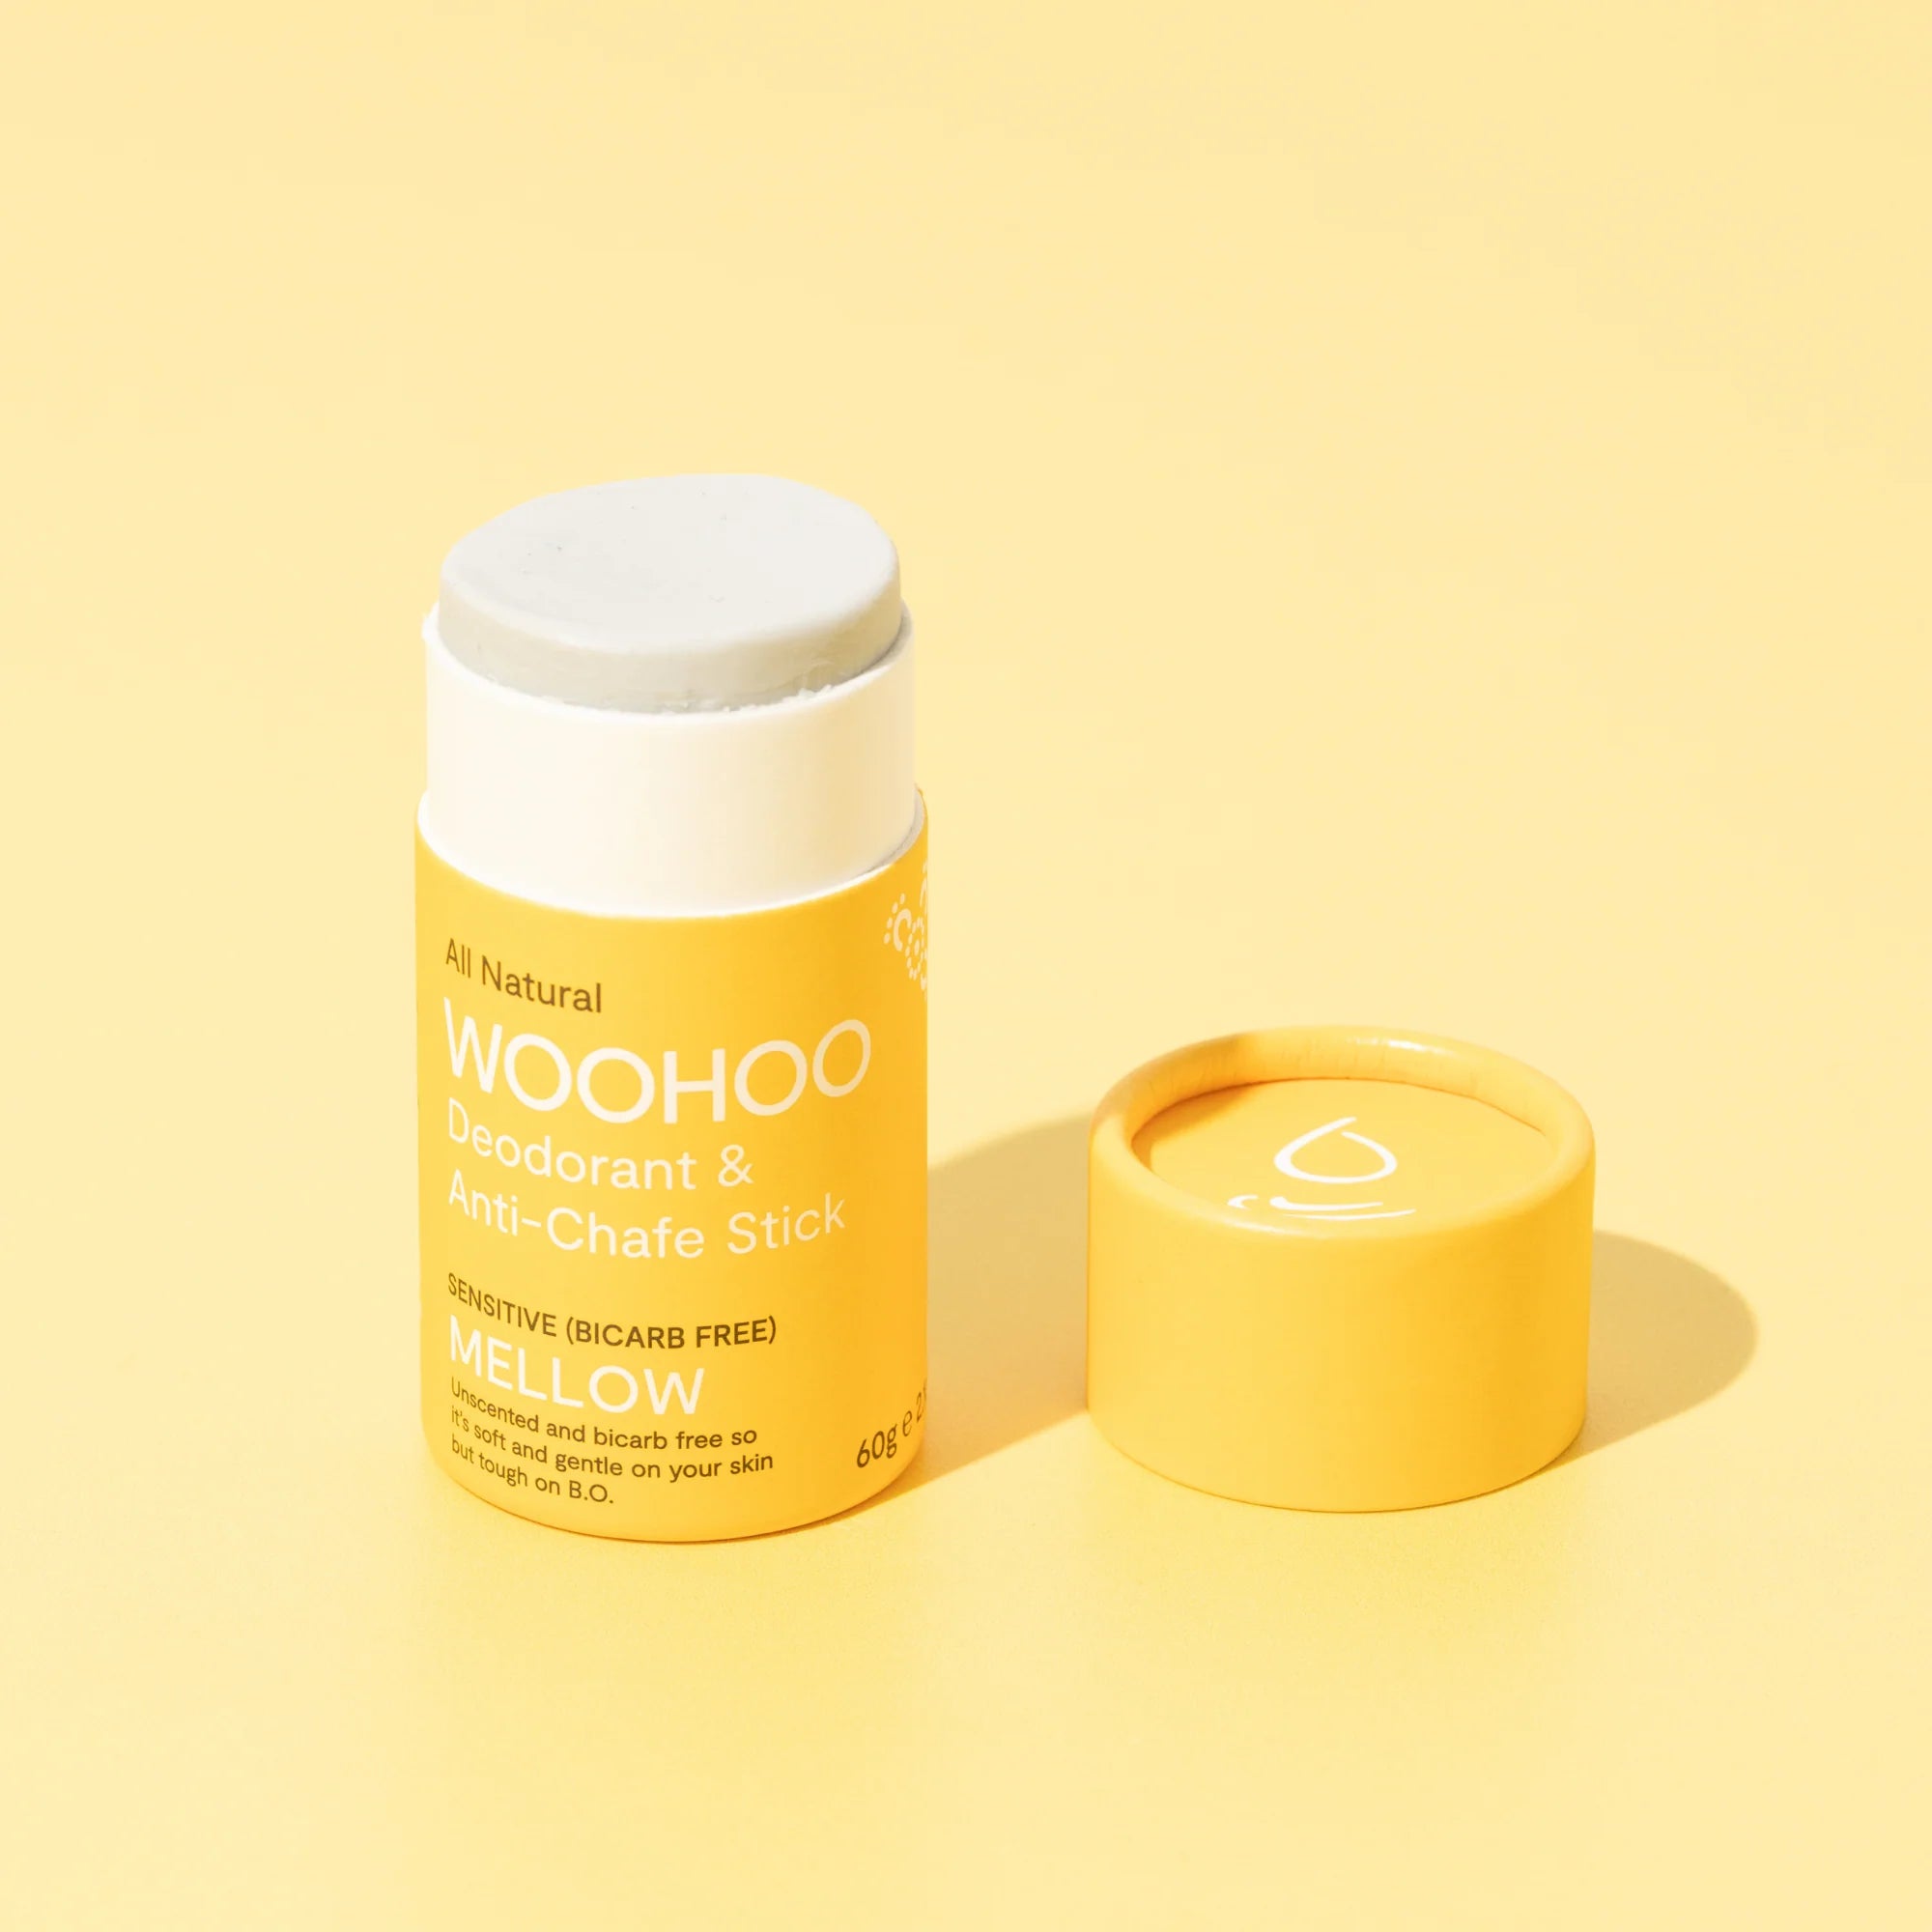 Image of opened Mellow Natural Bicarb-free Deodorant Stick with cardboard cap next to the product on a light yellow background